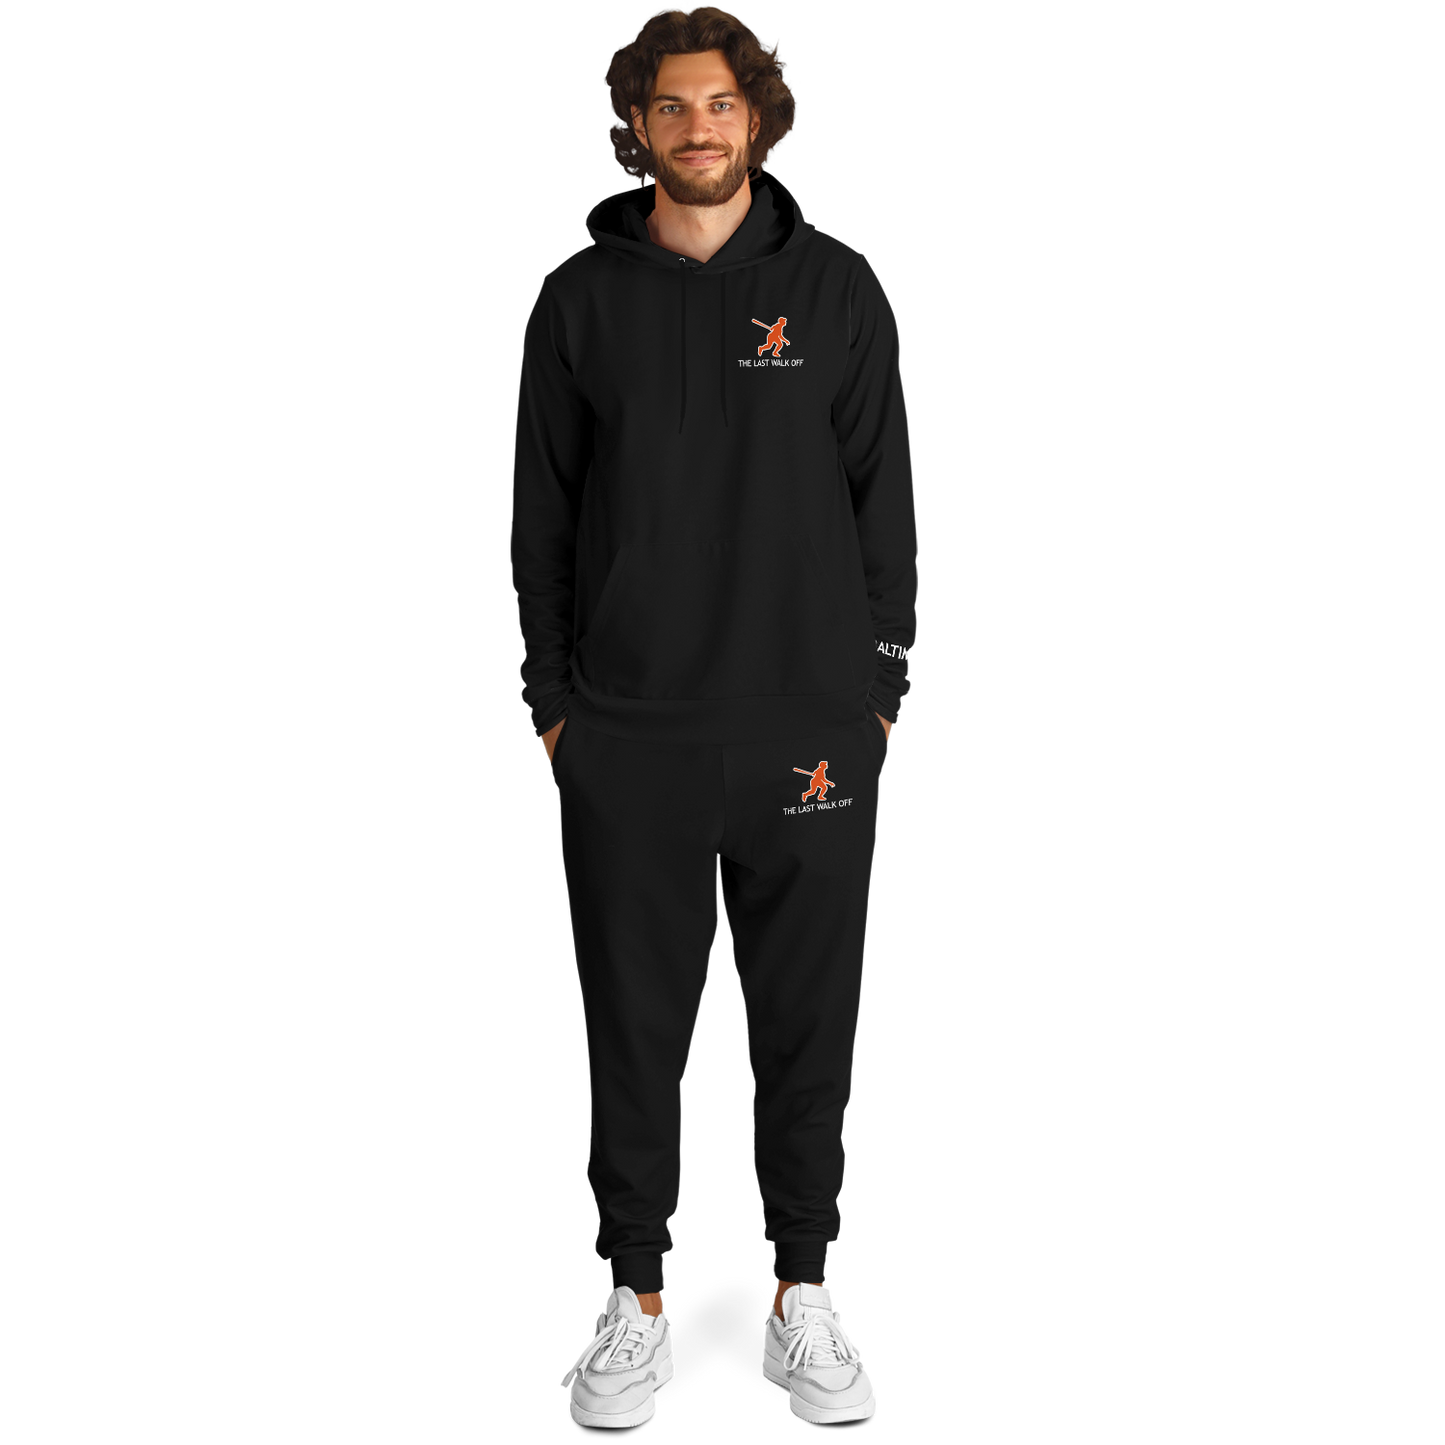 Baltimore Black Hoodie and Joggers Two